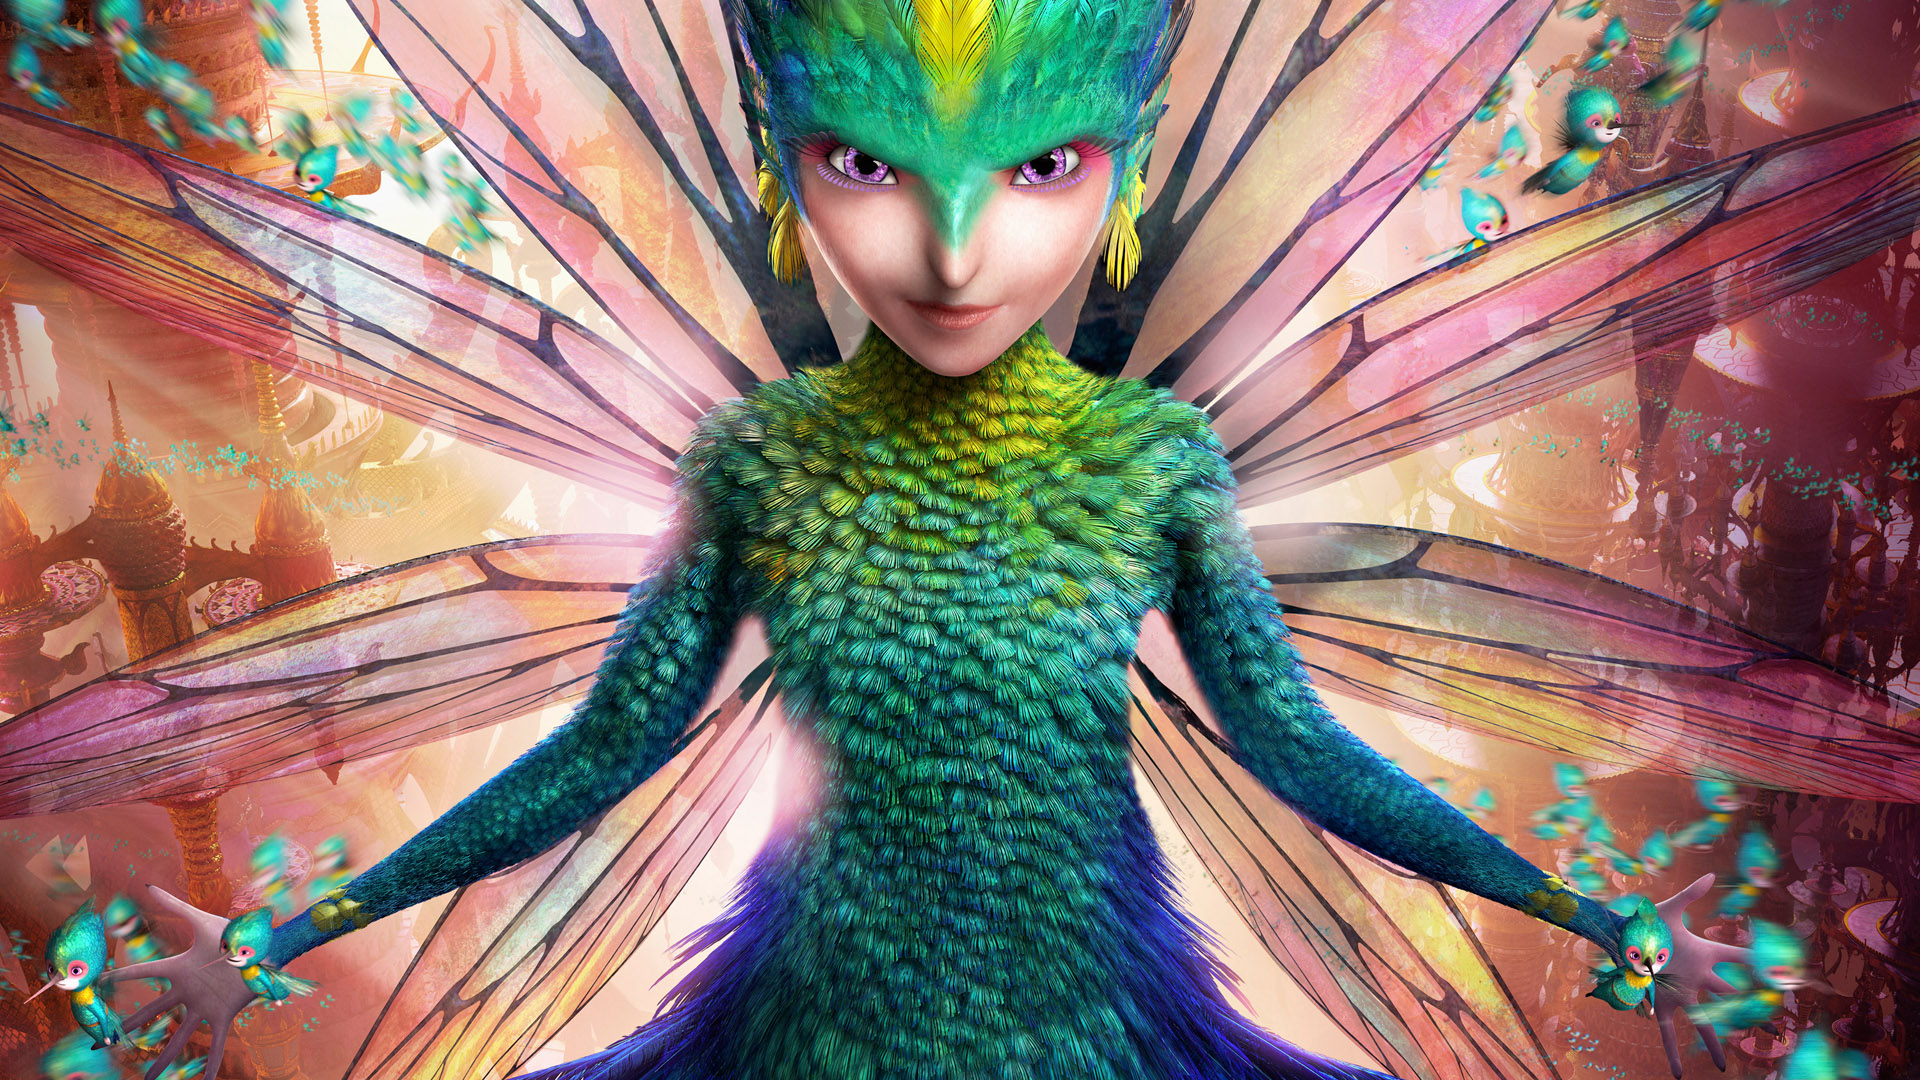 Rise Of The Guardians Art